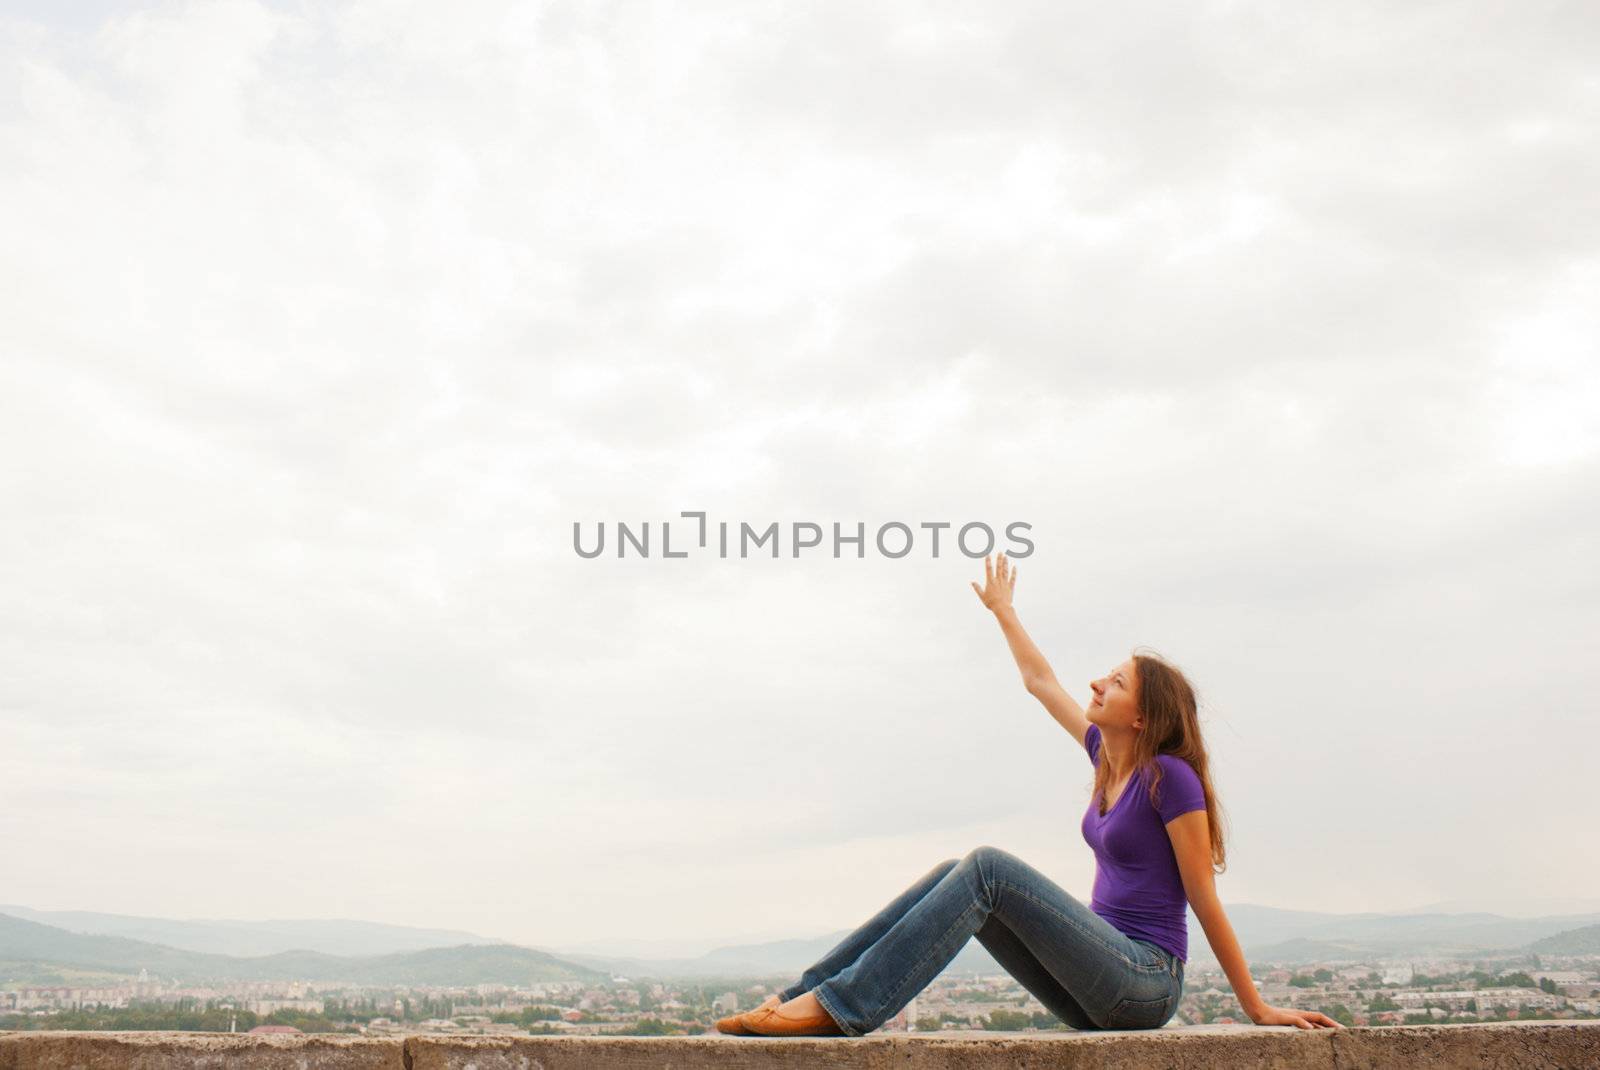 Young woman sitting with raised hand against blue sky